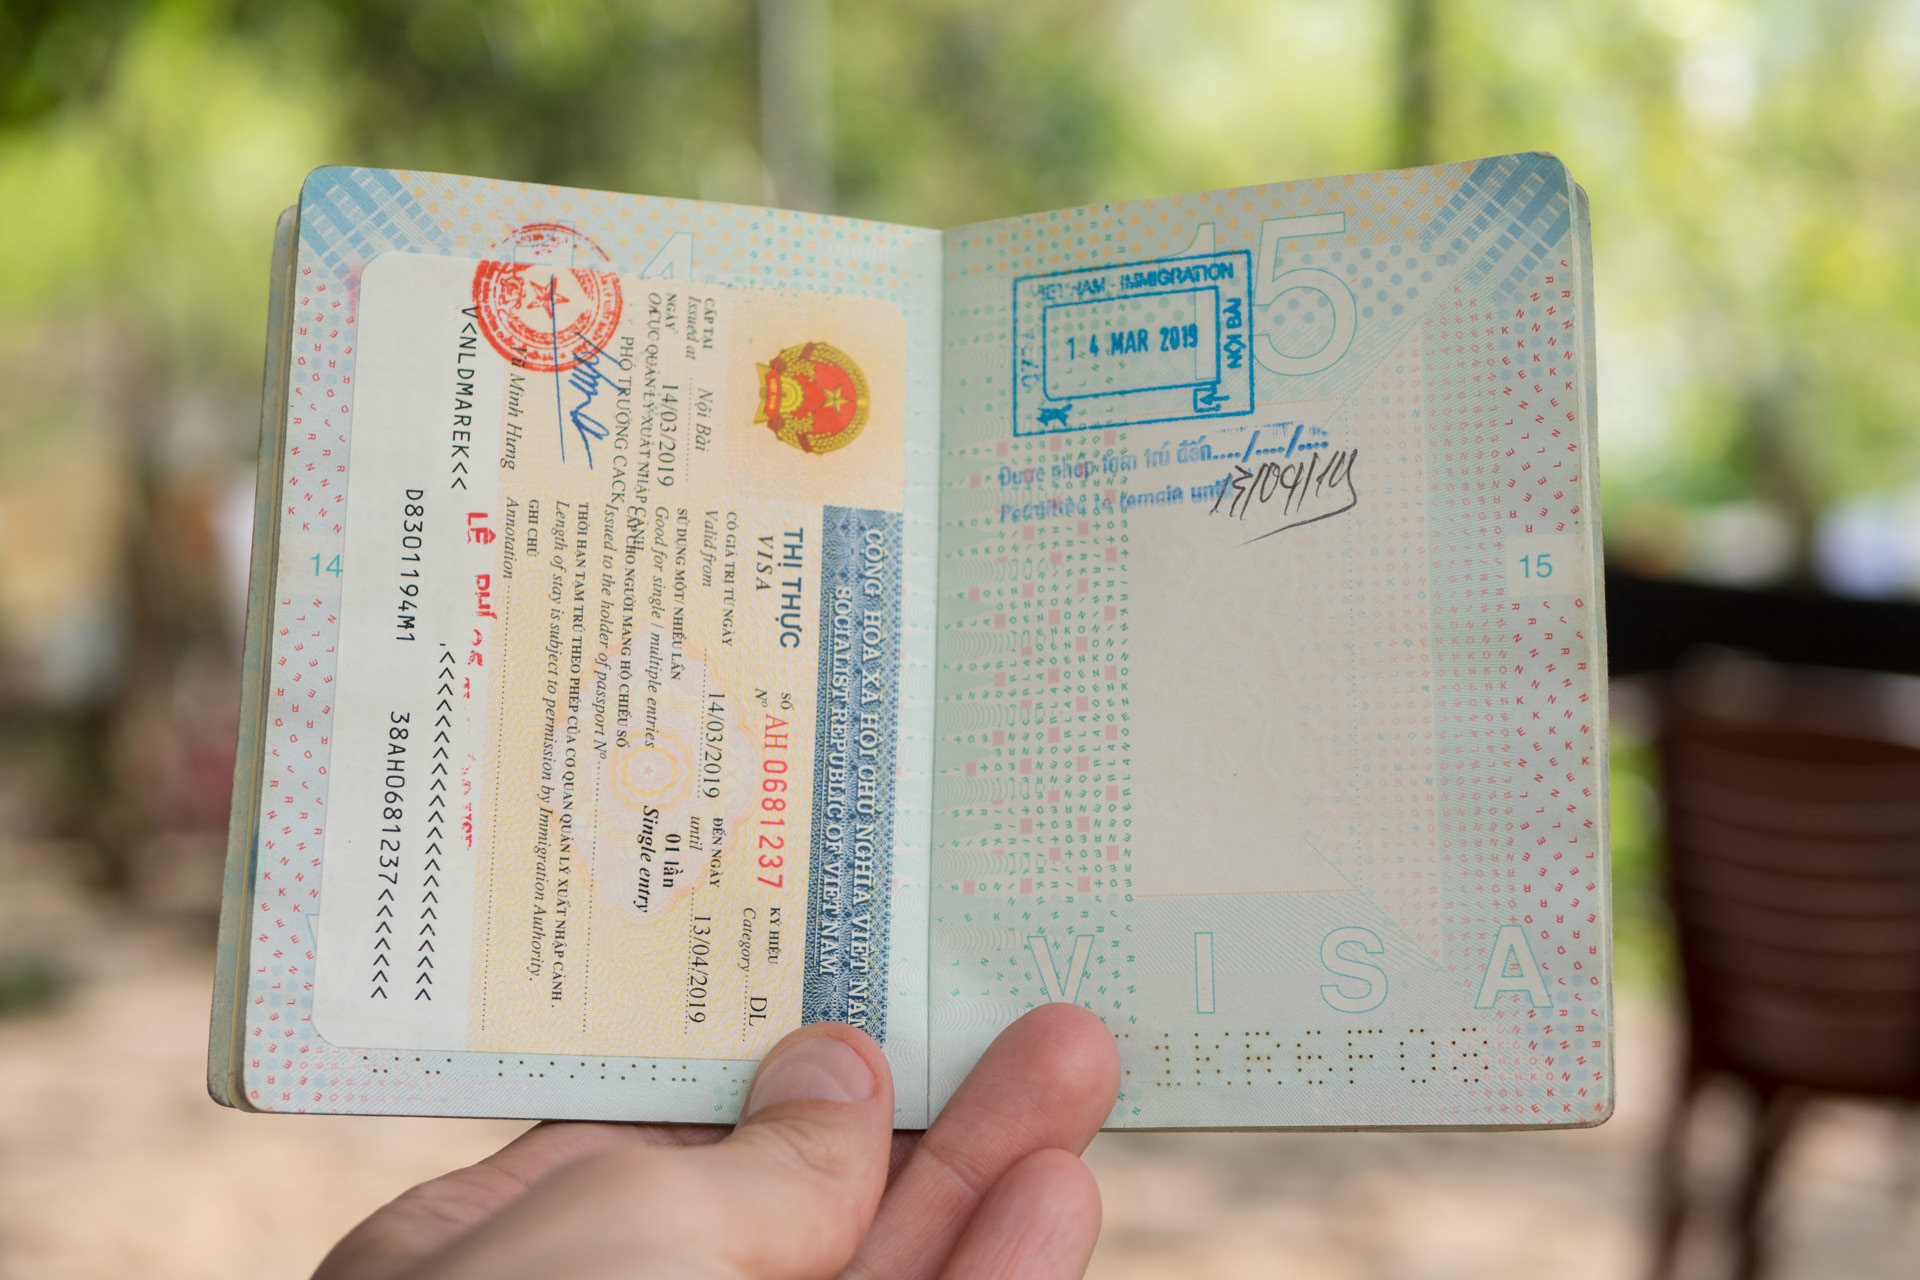 Processing time to apply visa in Vietnam